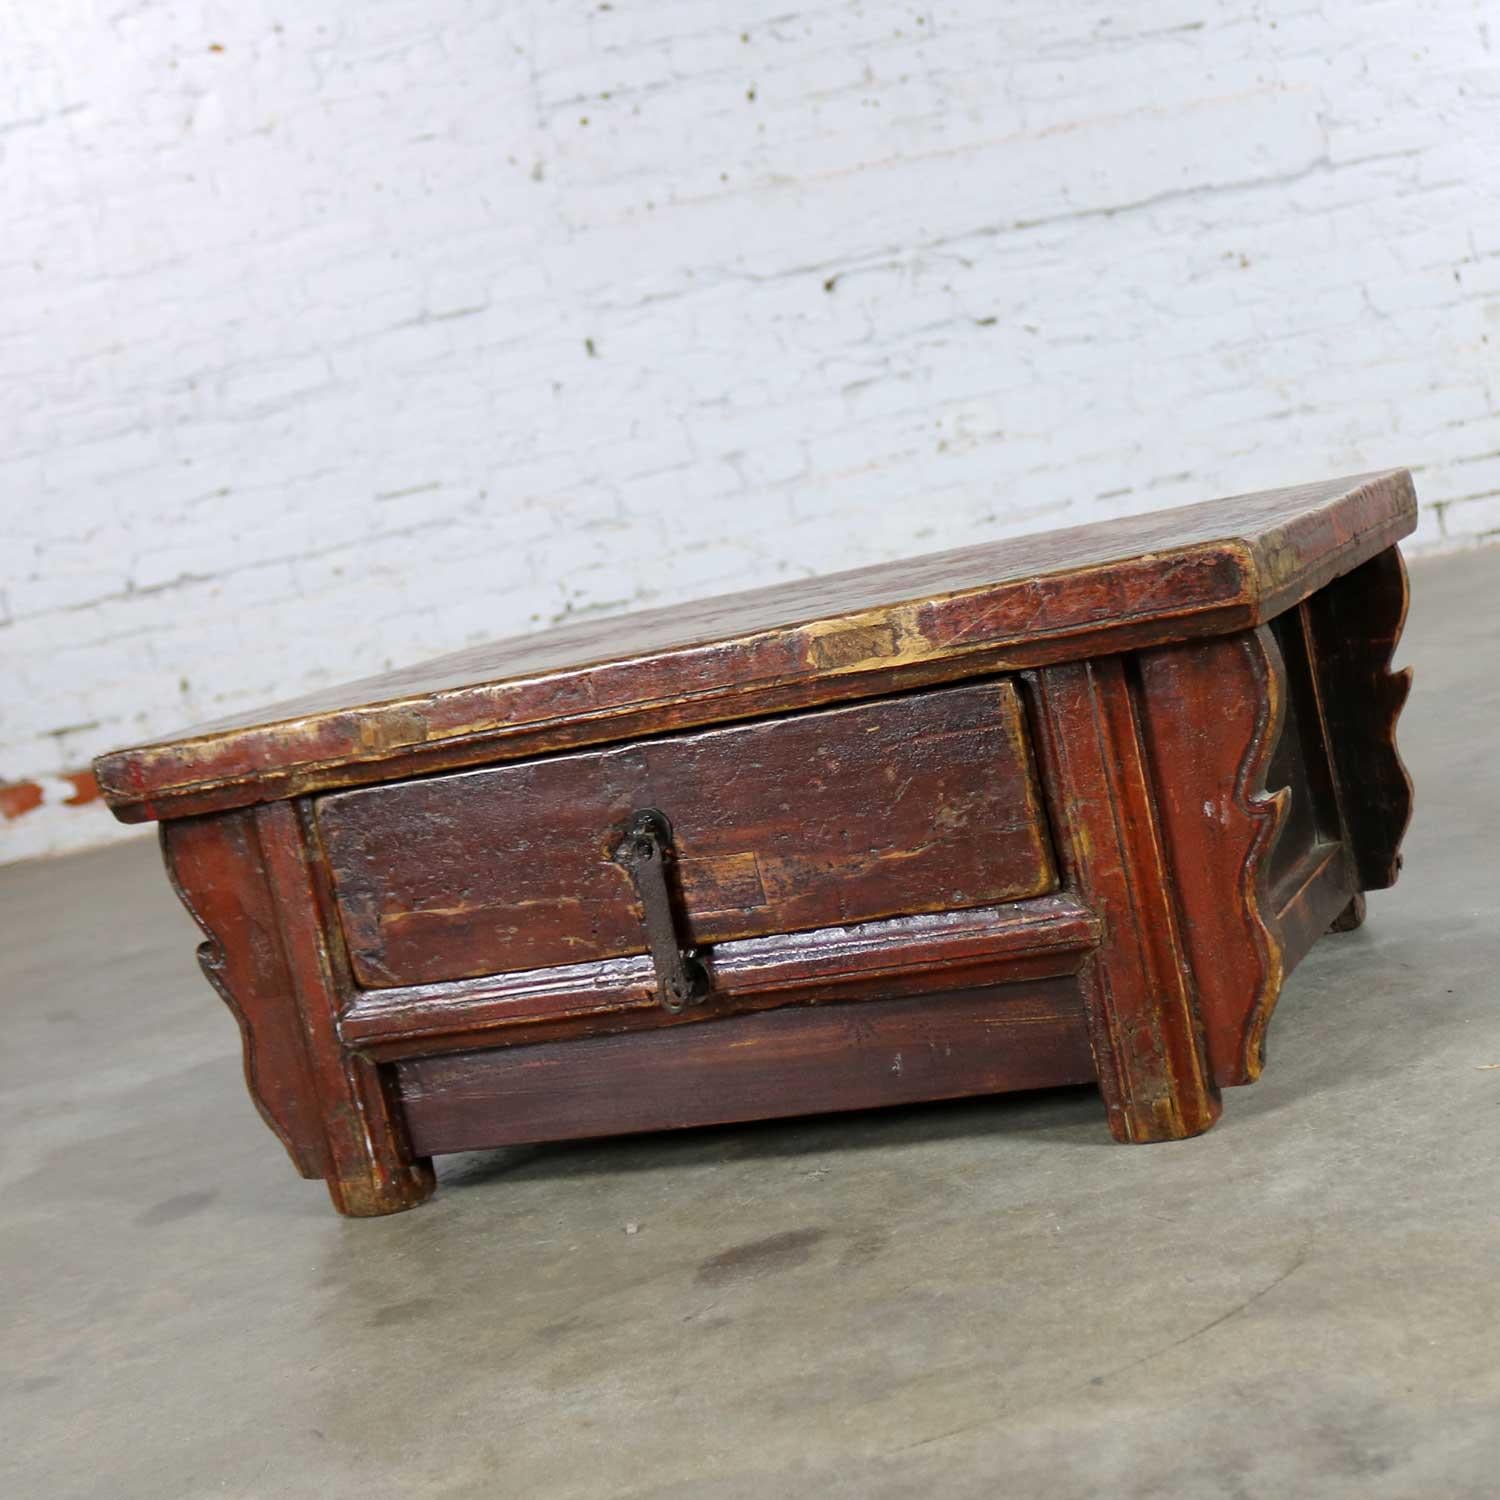 Chinese Export Antique Asian Low Tea or Altar Table with Drawer